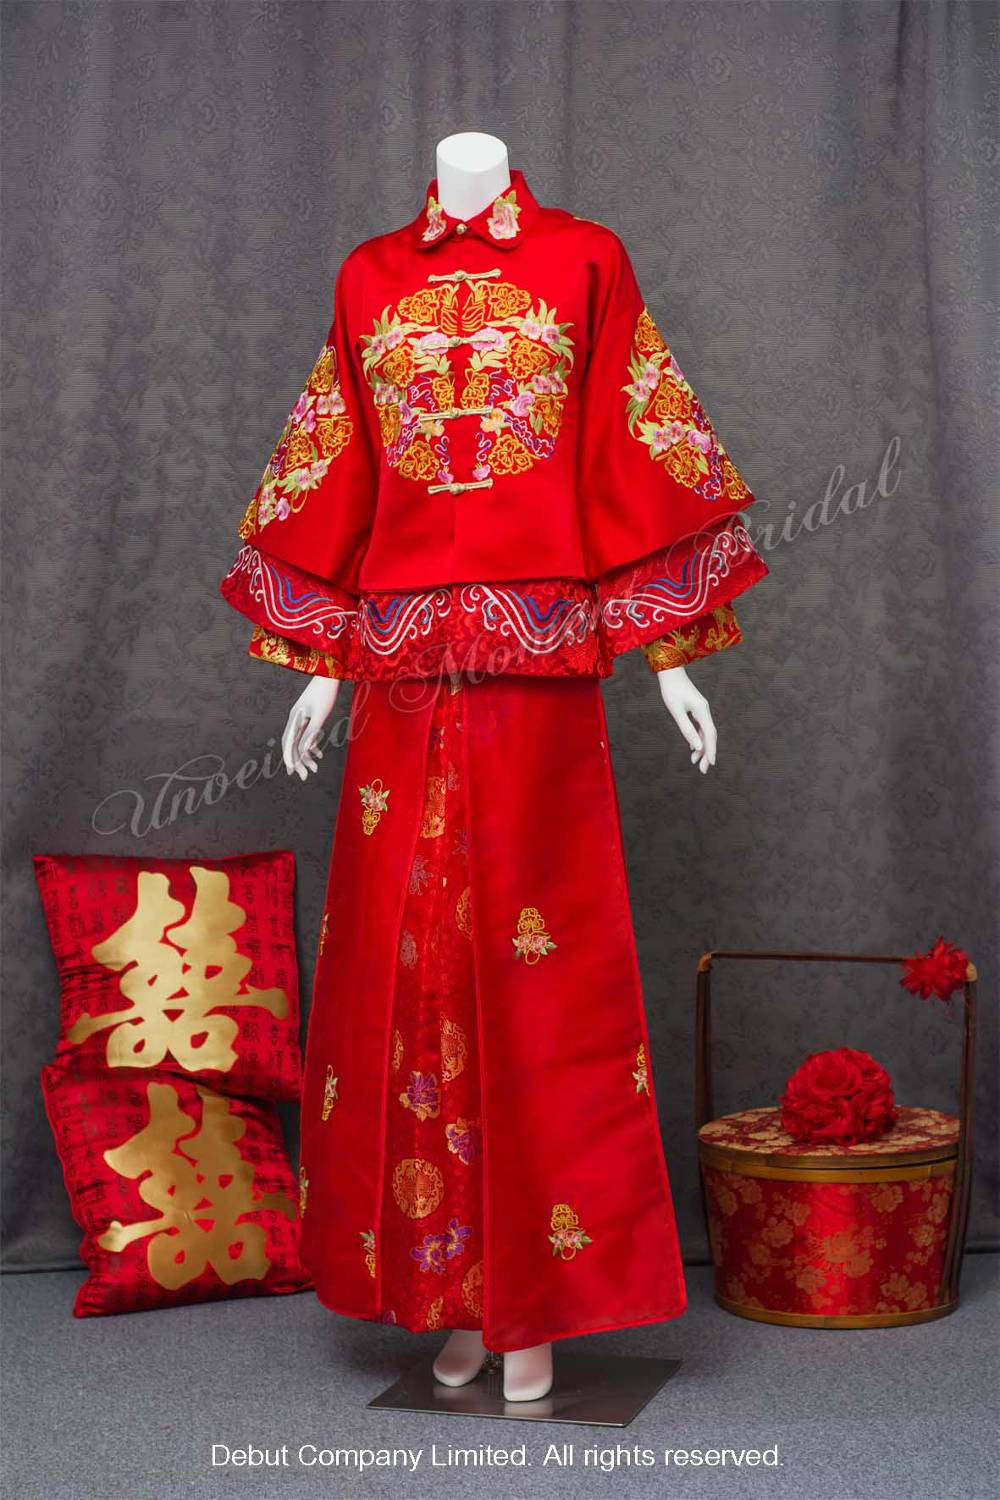 Modern Chinese Wedding Gown 牡丹刺繡中式潮褂